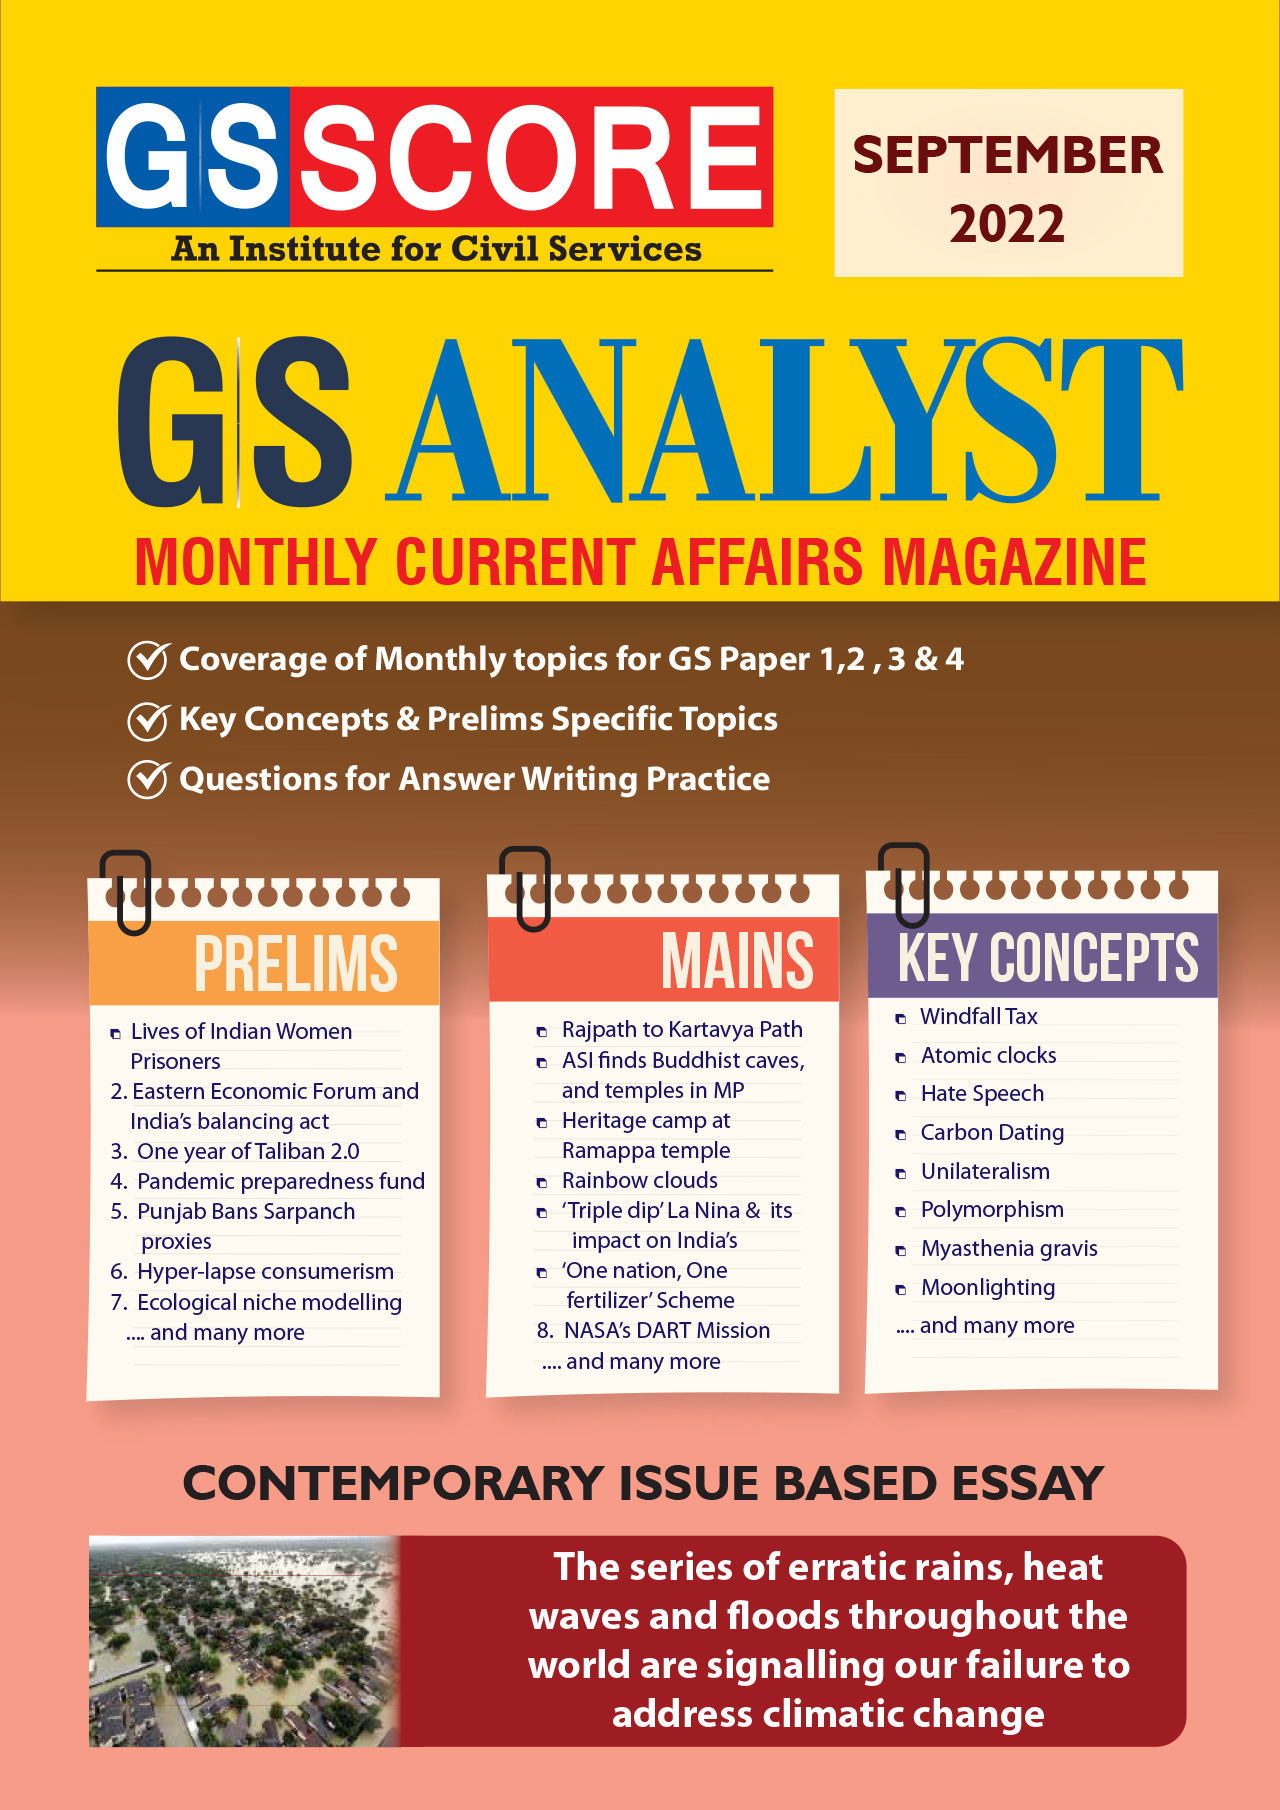 Monthly Current Affairs: September 2022 (GS Analyst)